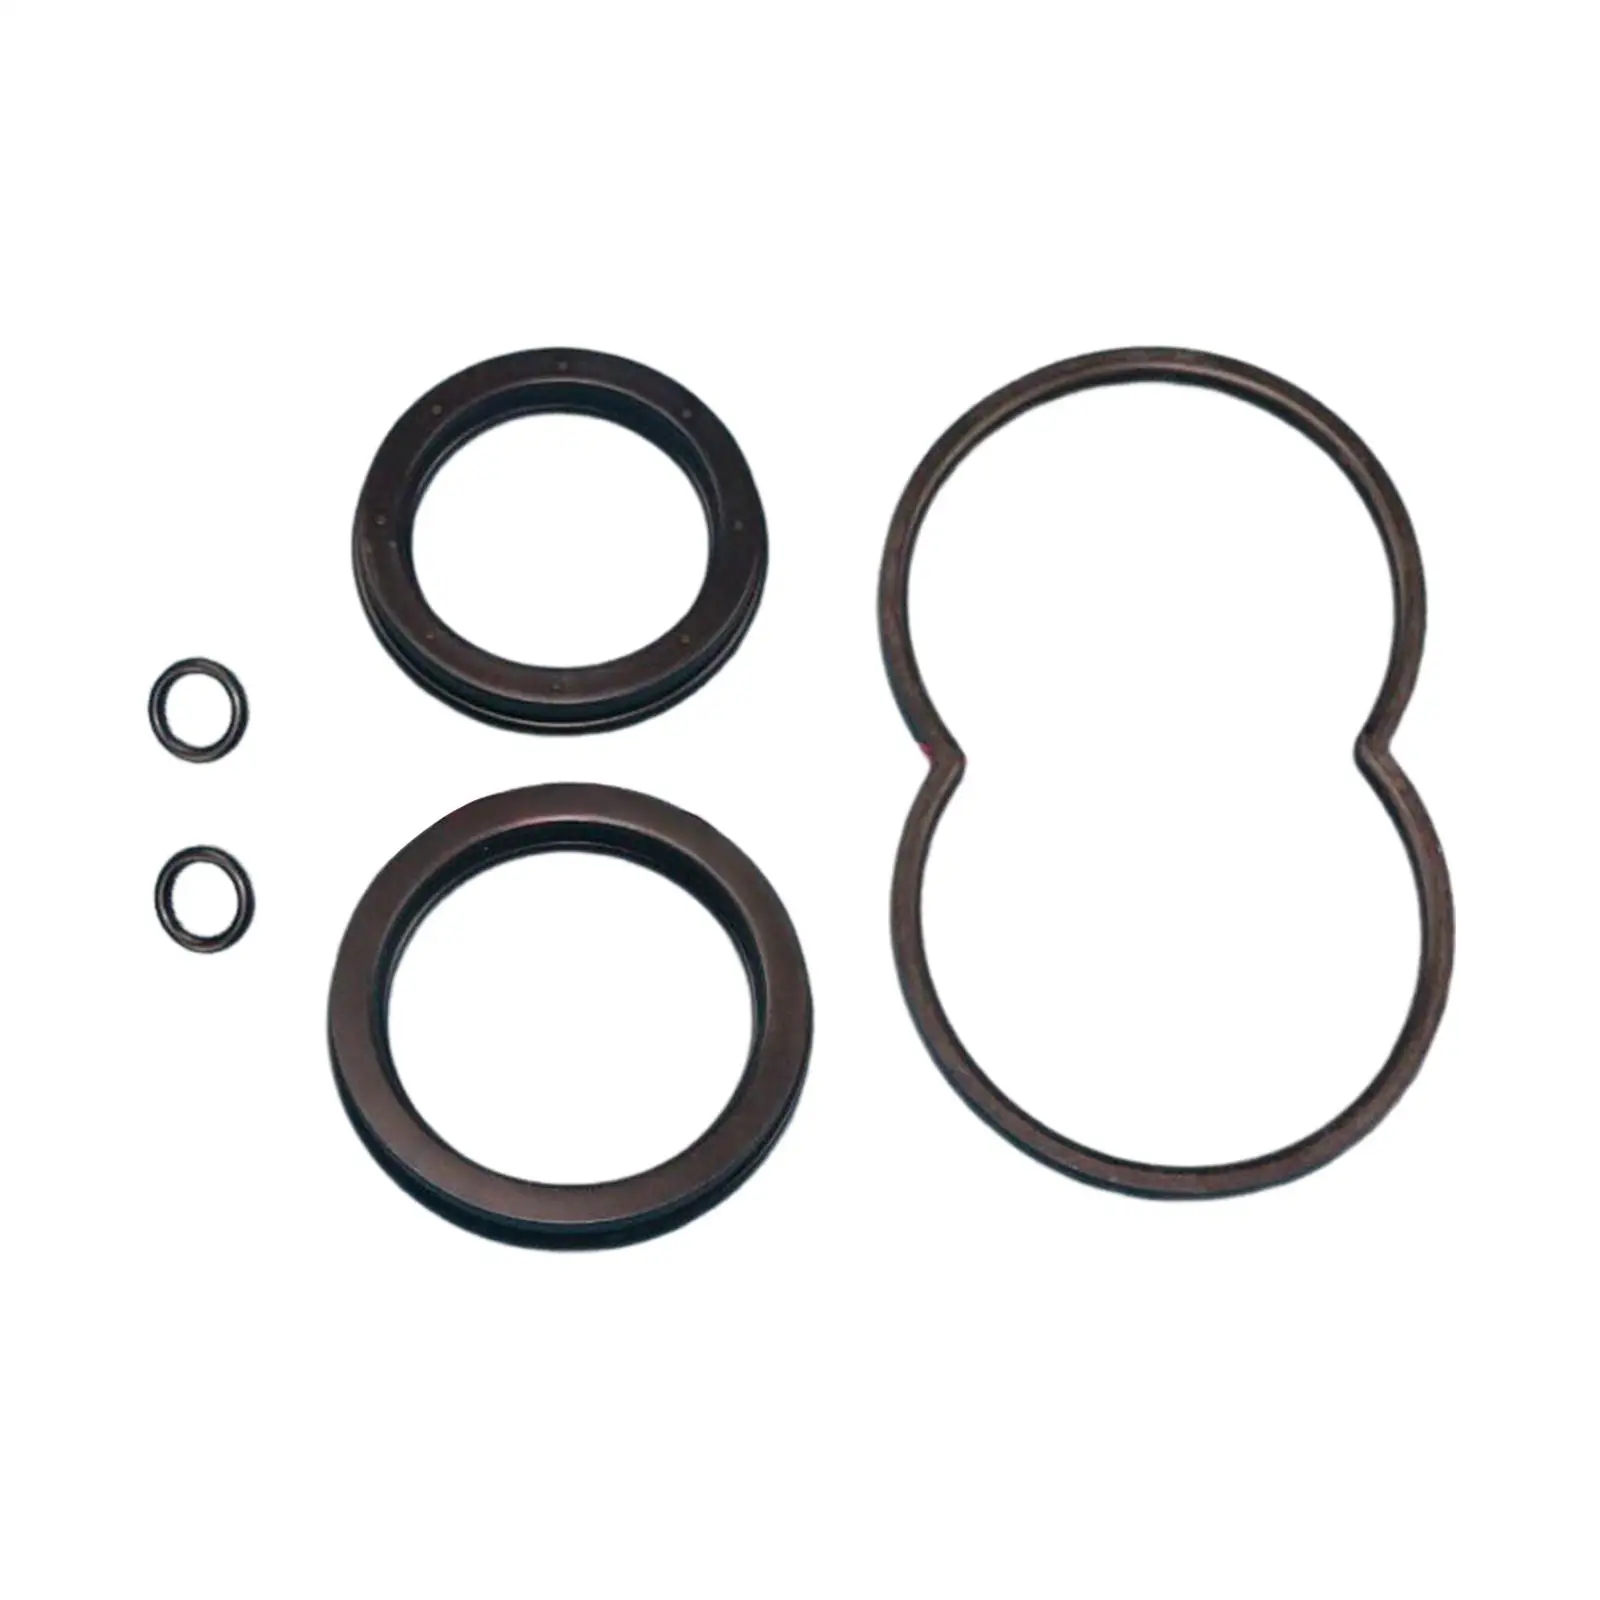 2771004 Seal Leak Repair Kits Fitments Car 5 Pieces Seal Kits for Ford